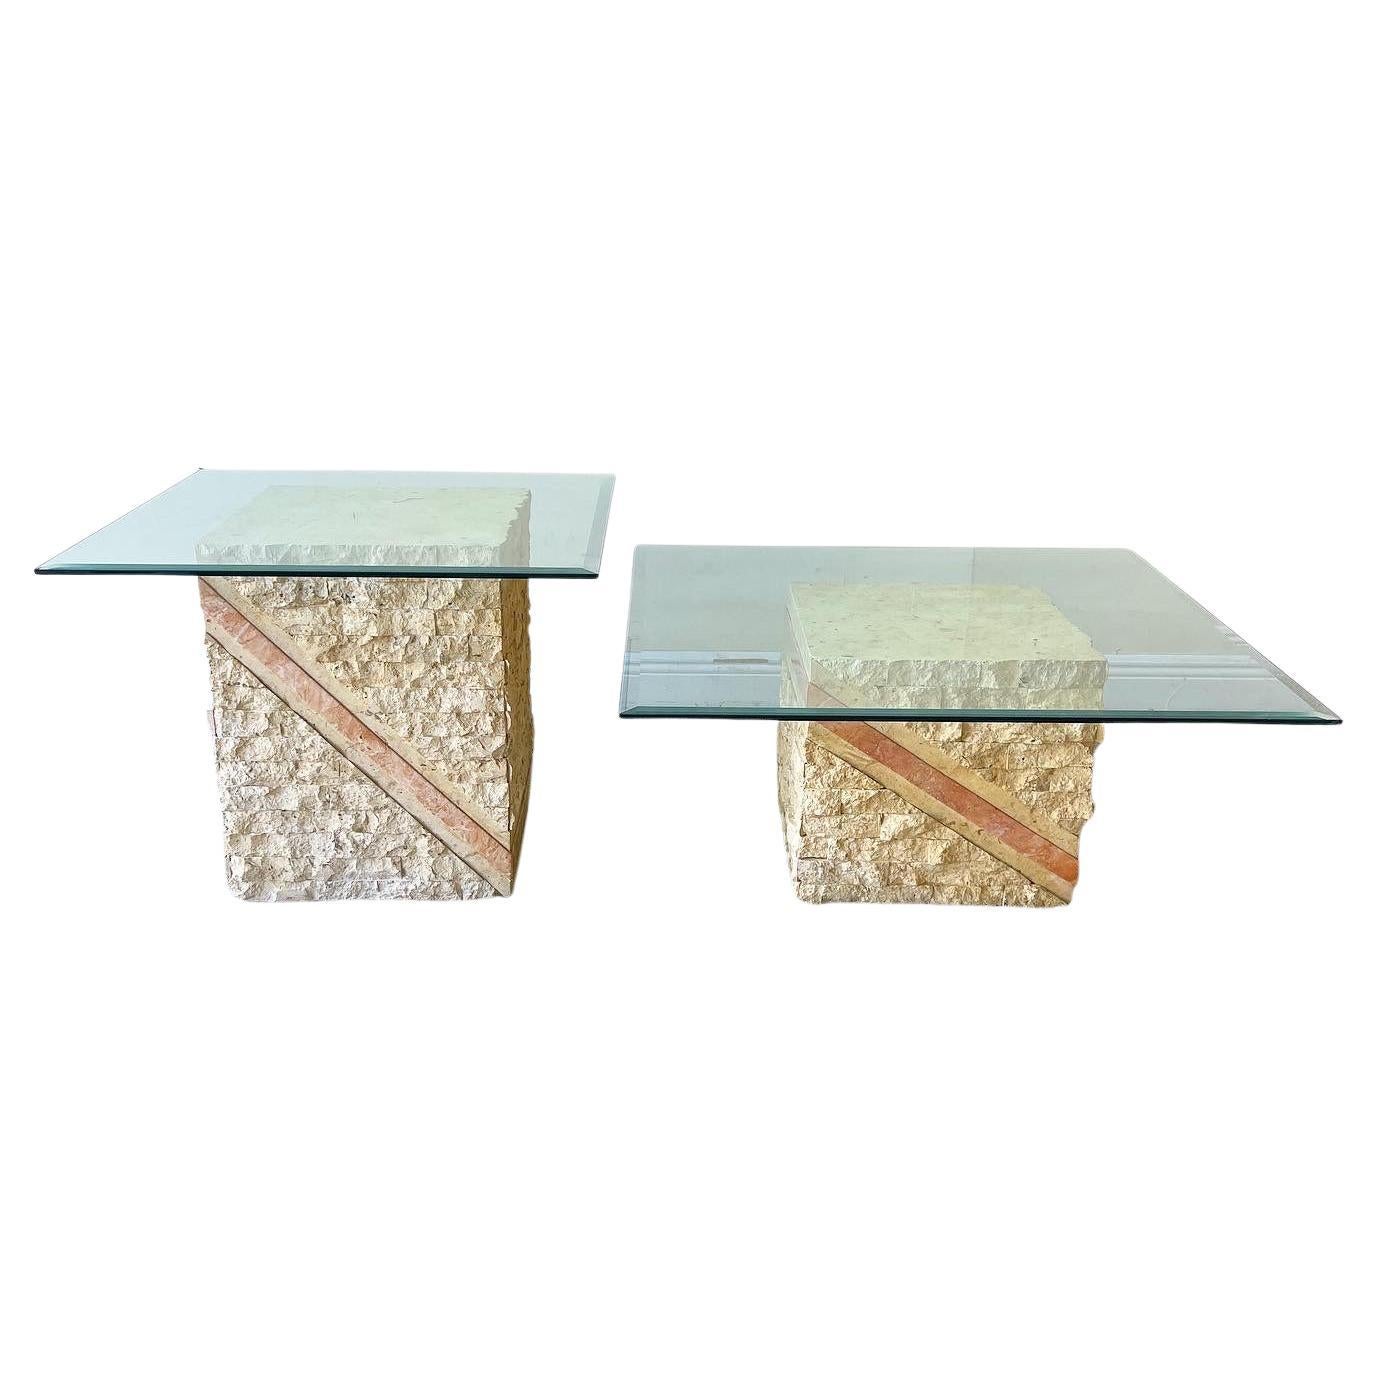 Postmodern Glass Top Tessellated Beige and Pink Stone Coffee & Side Table Set